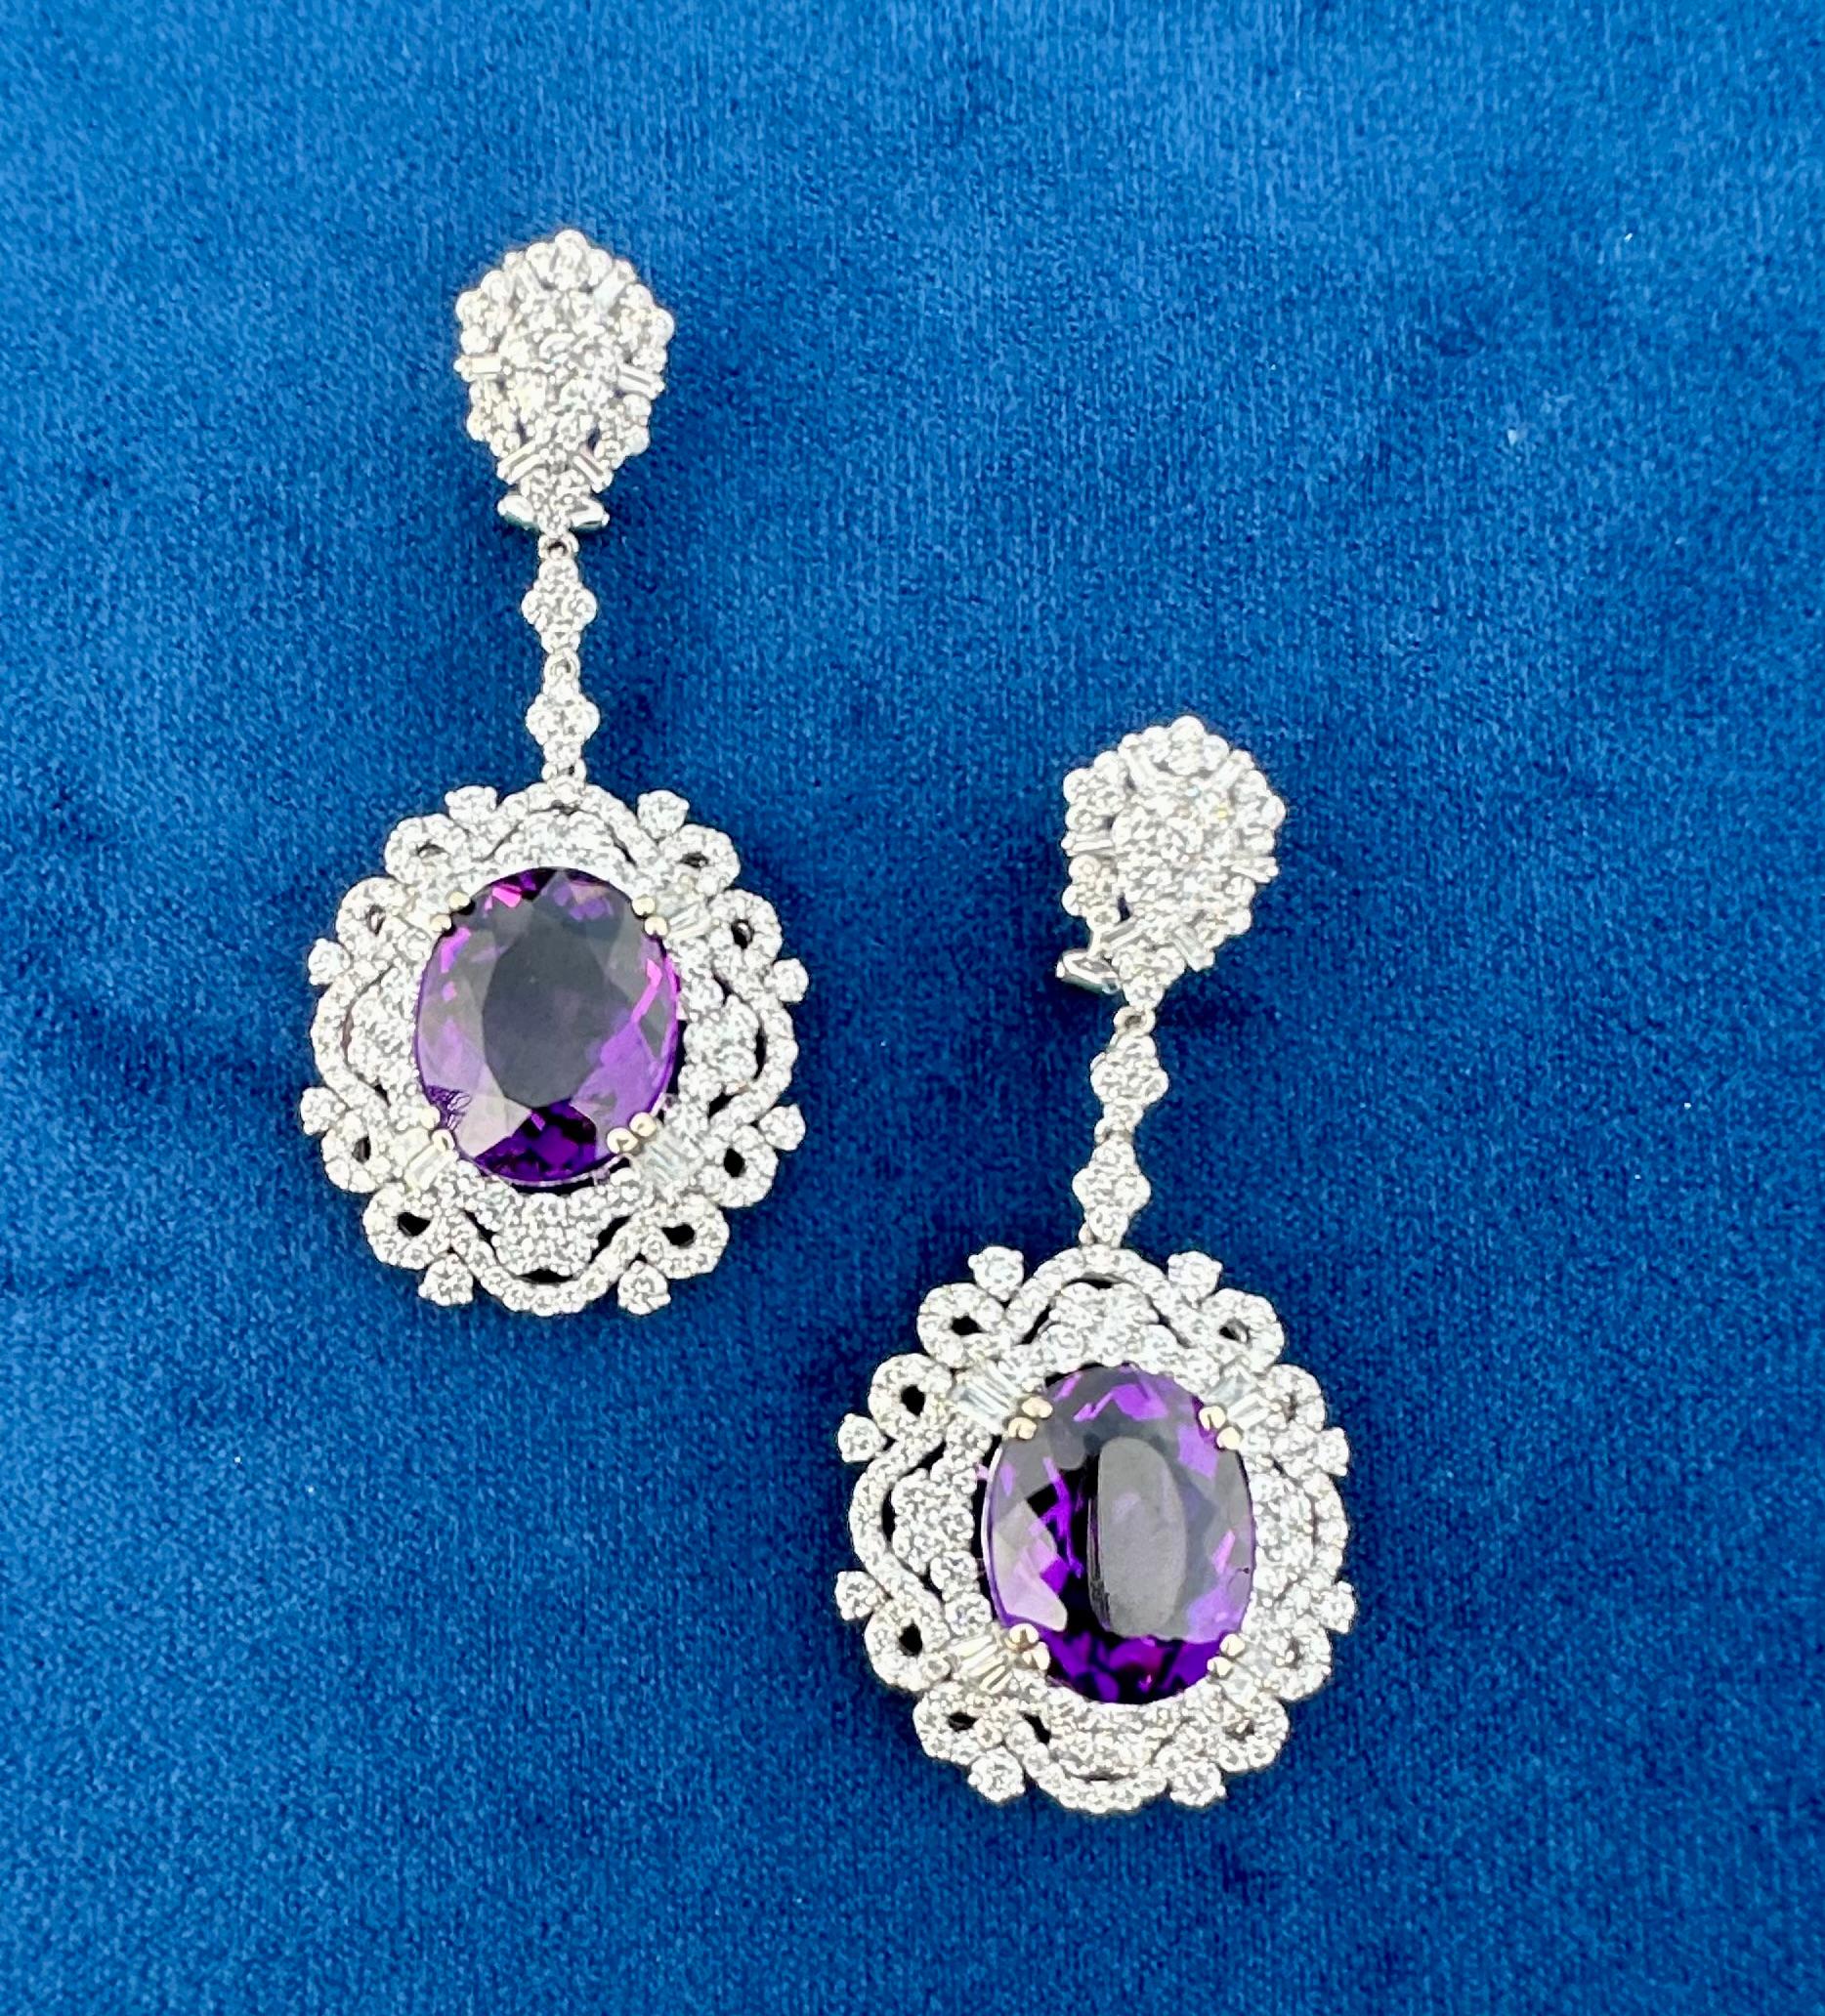 A very exquisite pair of very sparkly in real life, approximately 42.49 carat natural intense purple Brazilian amethyst and diamond earrings are set in 18 karat white gold and are comprised of approximately 354 round brilliant and baguette cut